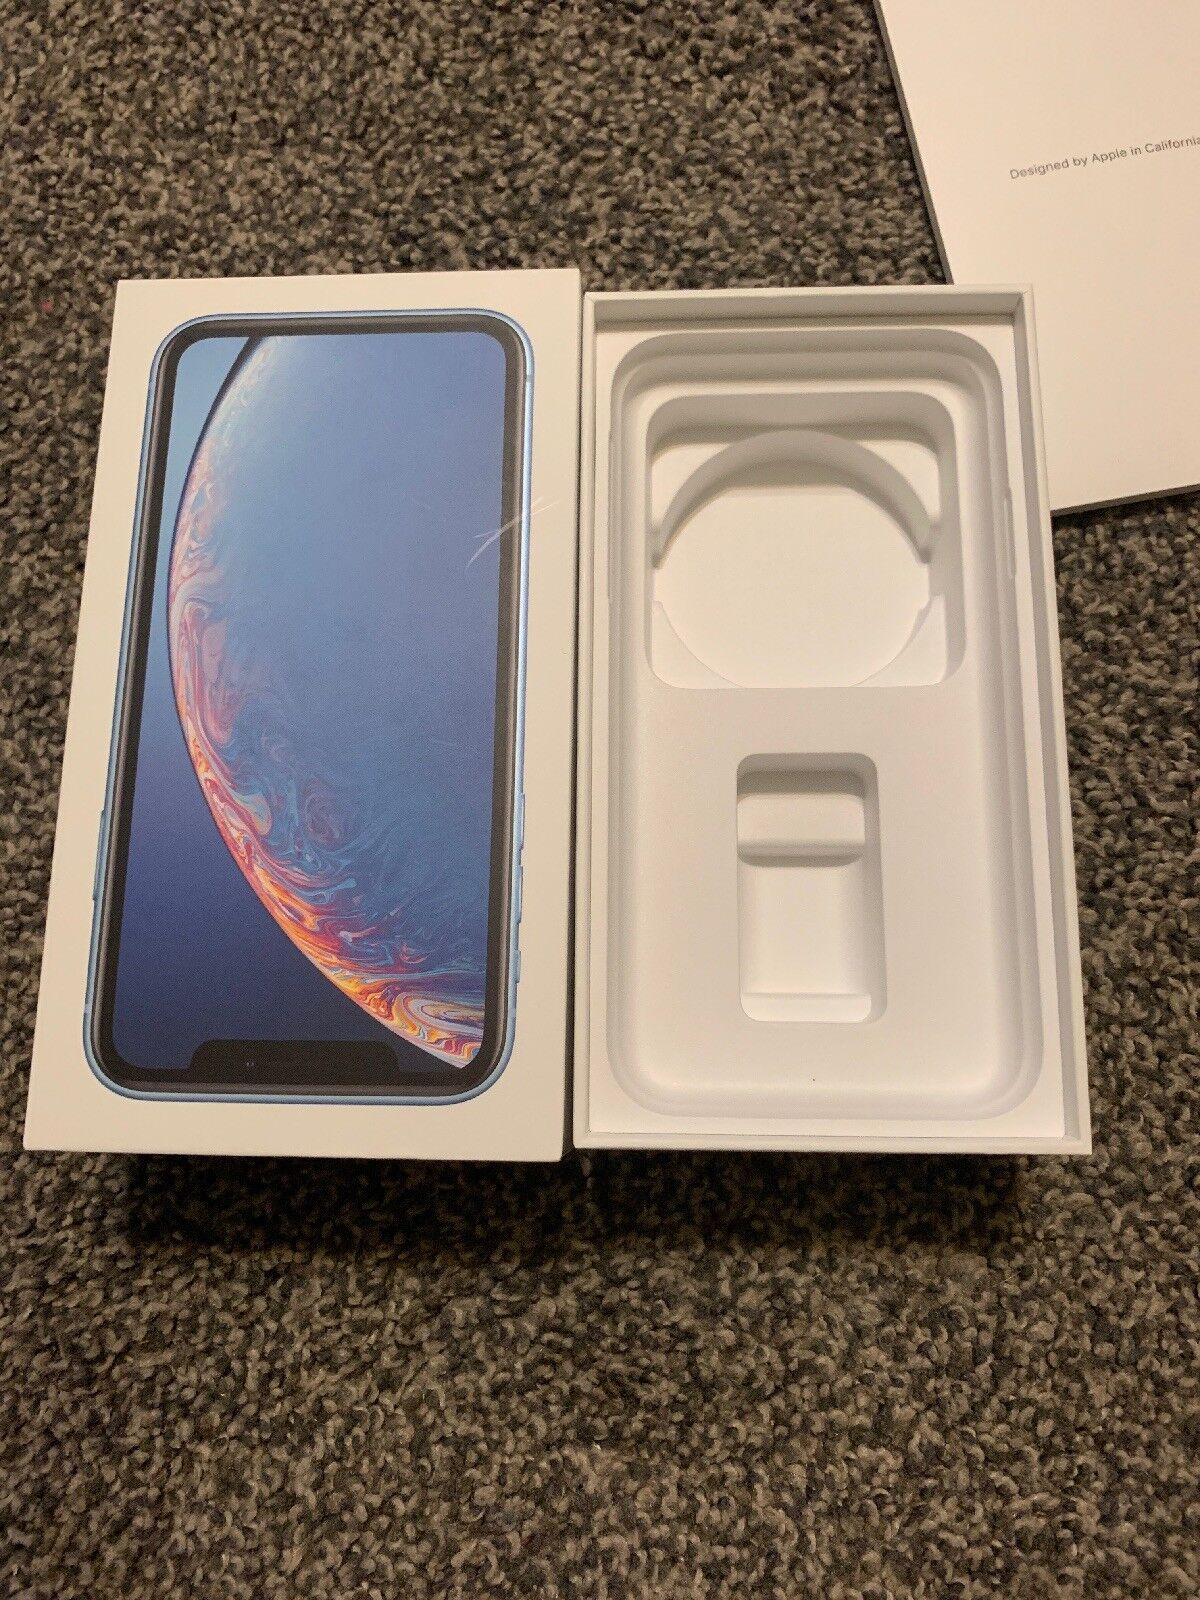 iPhone XR 64 GB Blue Box Only No Phone With Papers | eBay